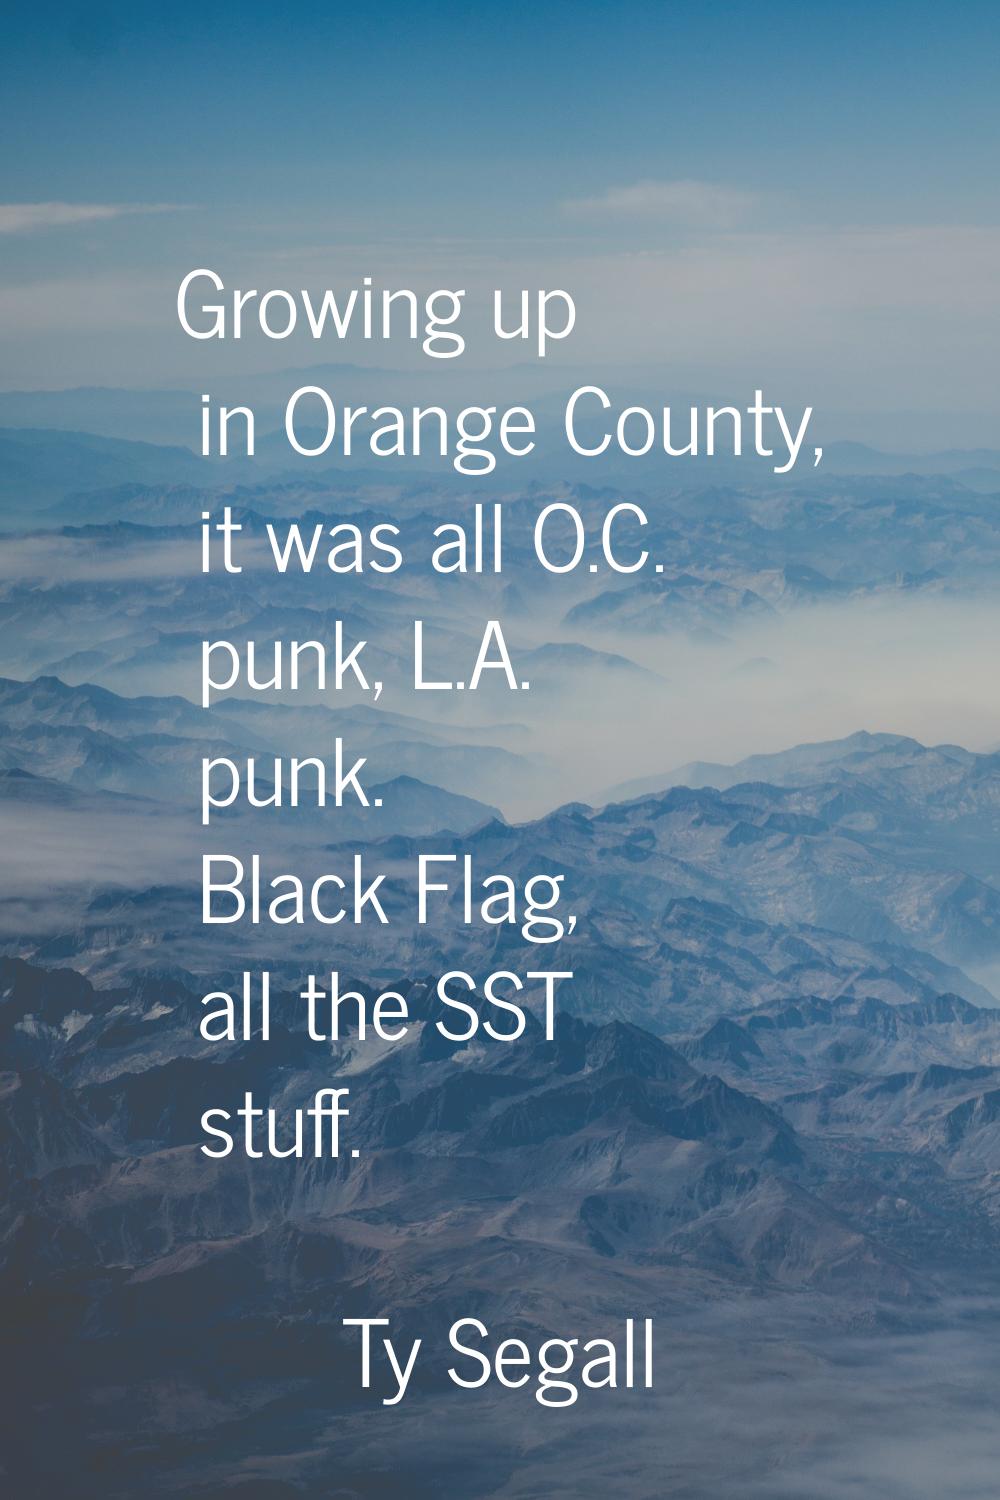 Growing up in Orange County, it was all O.C. punk, L.A. punk. Black Flag, all the SST stuff.